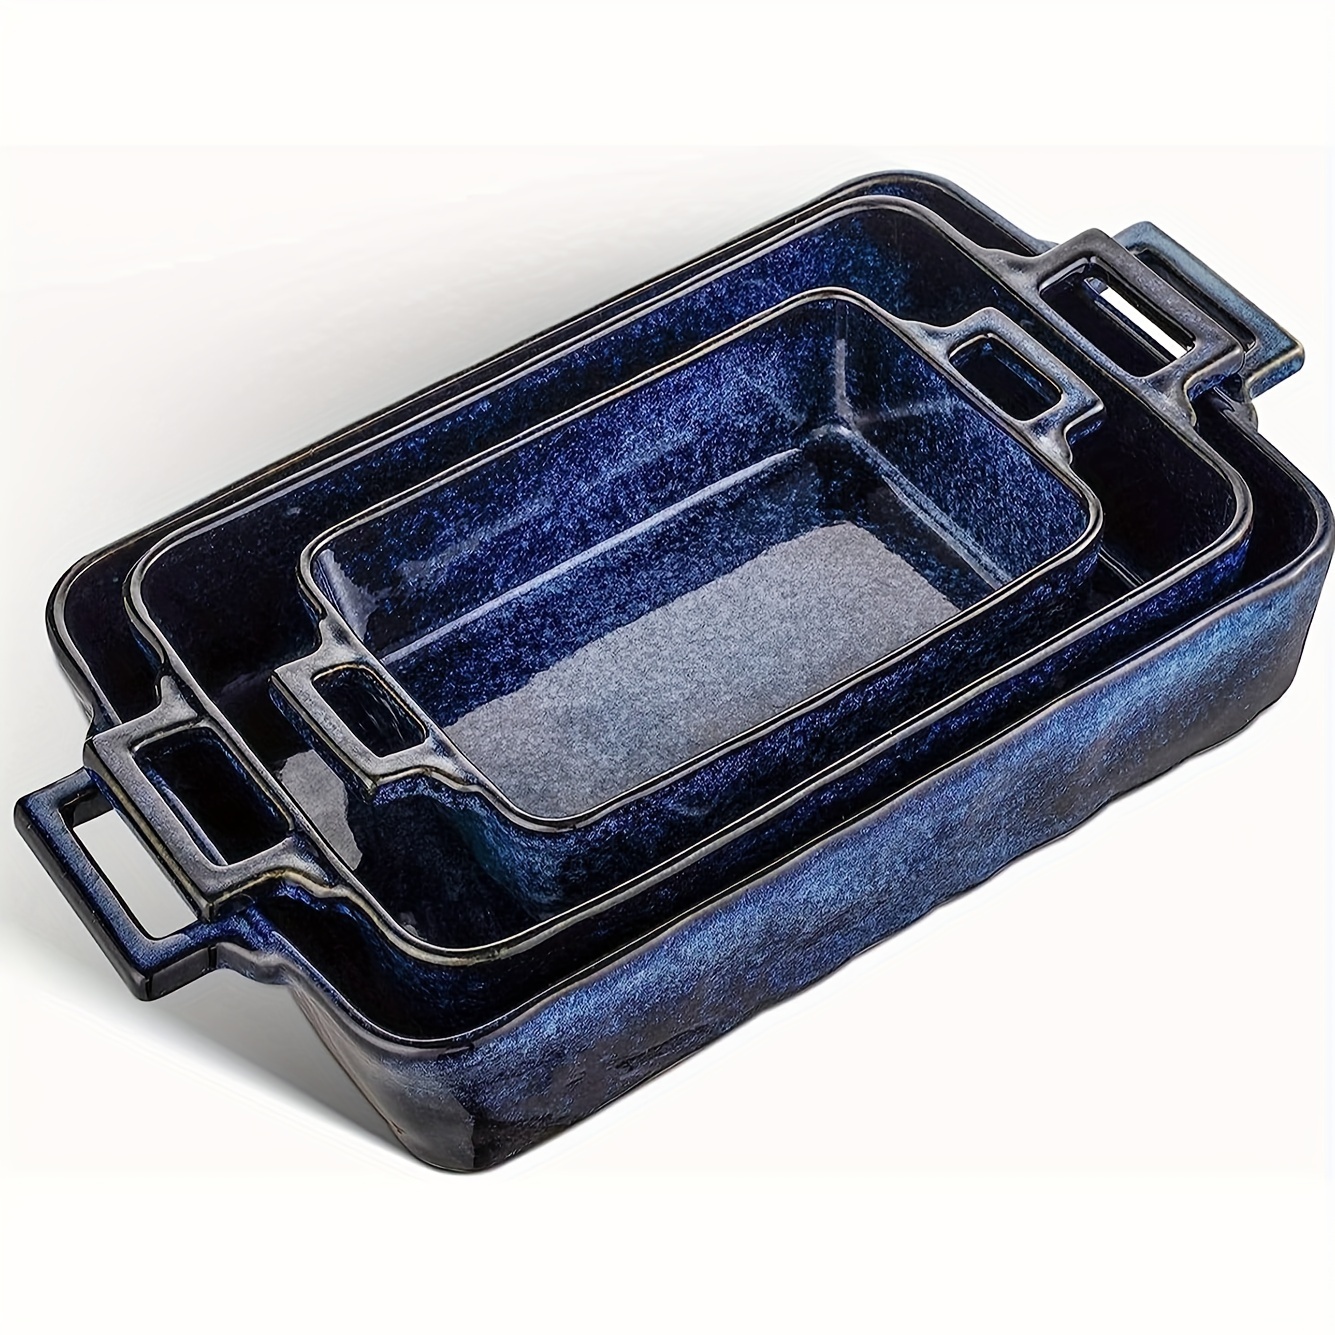 

3pcs, Set, Porcelain Rectangular Lasagna Pans Casserole Dish Set For Kitchen, Cooking, Baking, Cake Dinner, Banquet And Daily Use, 15 X 8.5 Inches (blue)